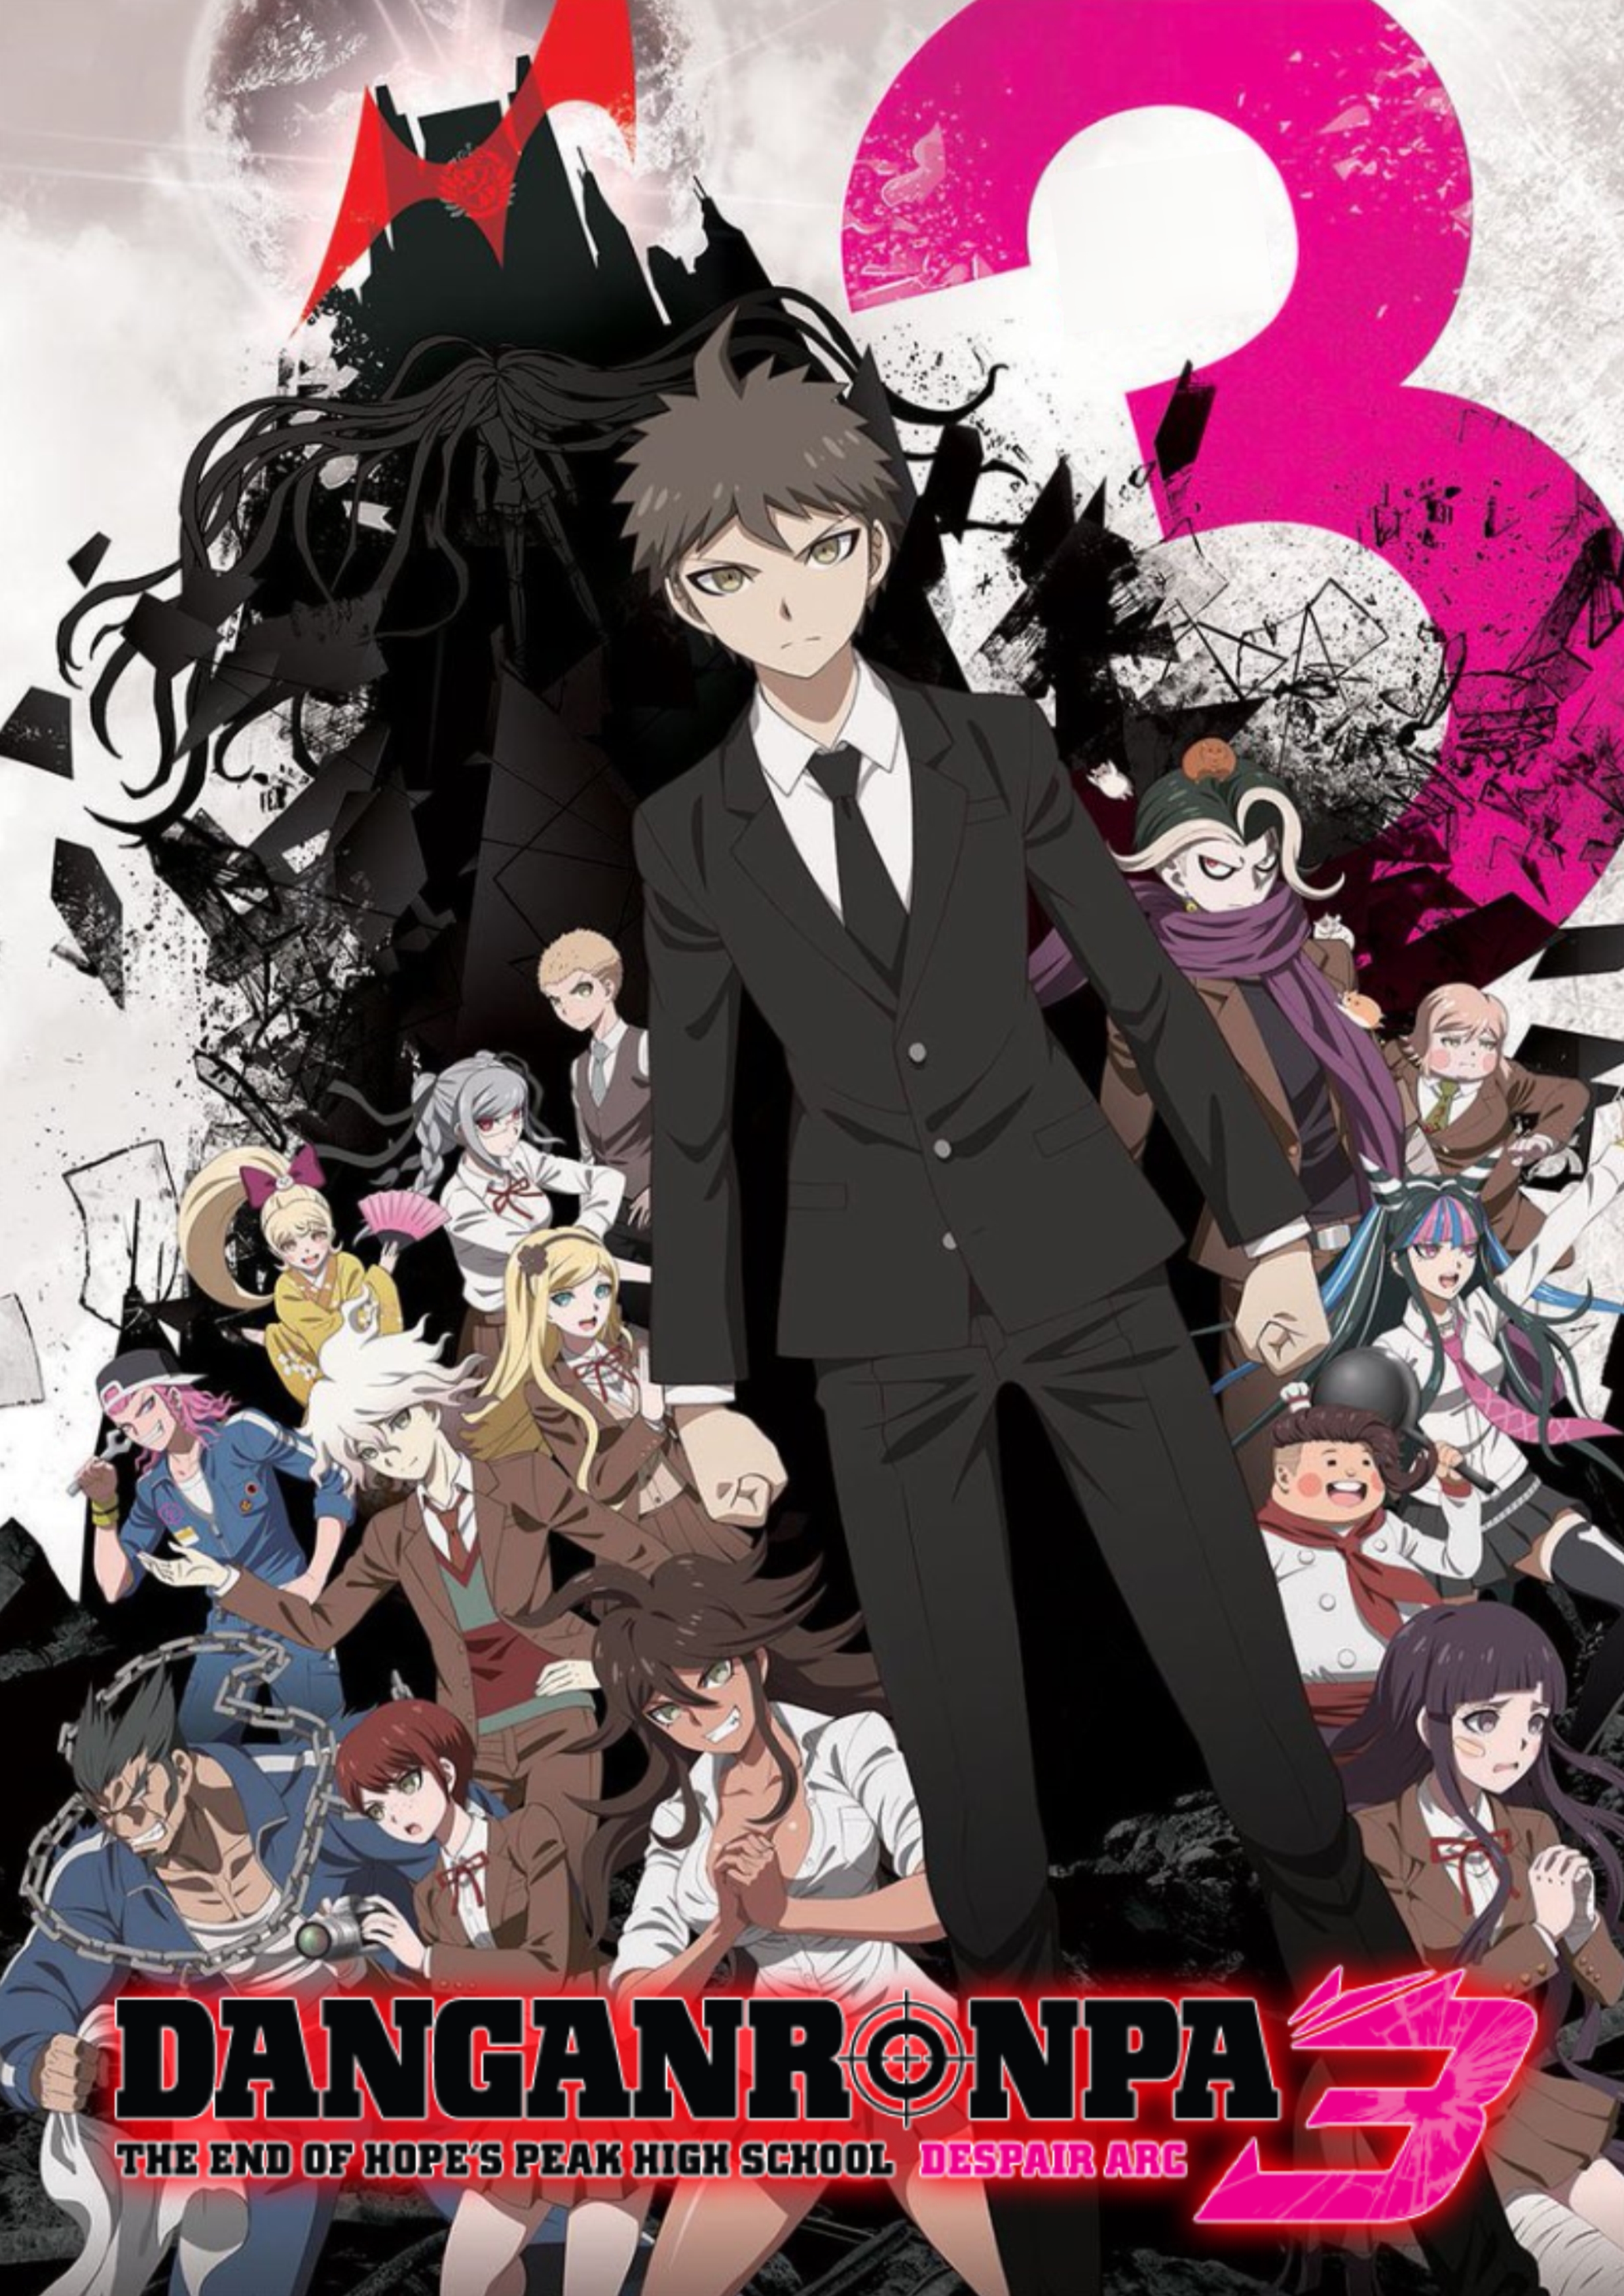 Review: Danganronpa 3: The End of Hope's Peak High School - Rely on Horror